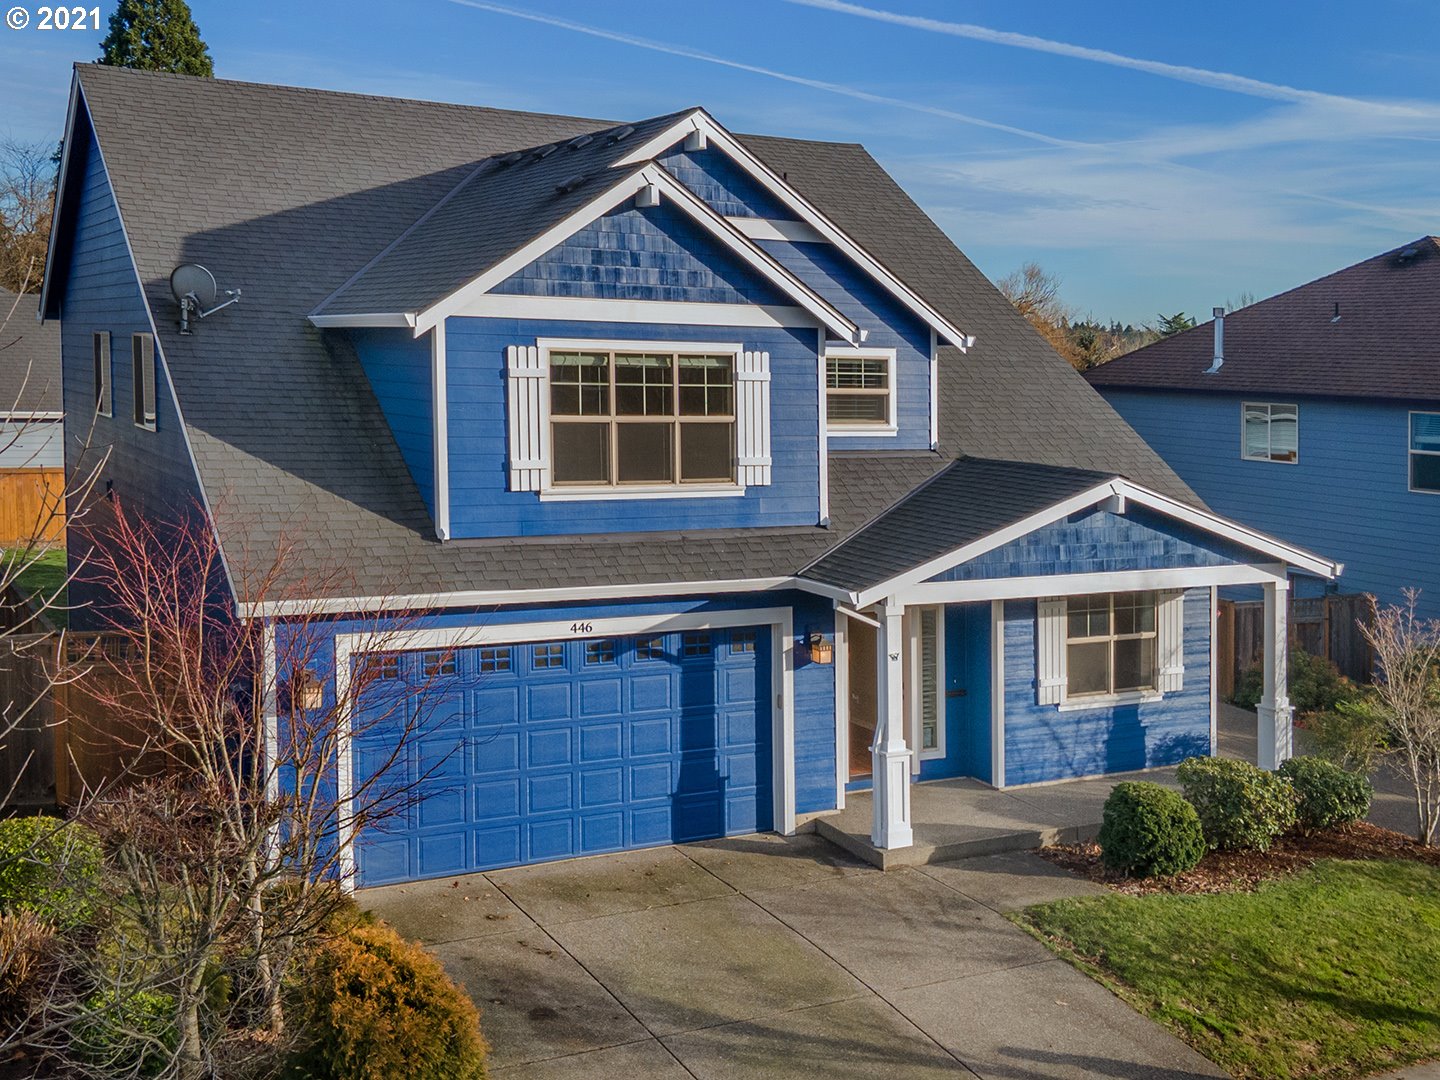 446 SW 140TH AVE (1 of 31)